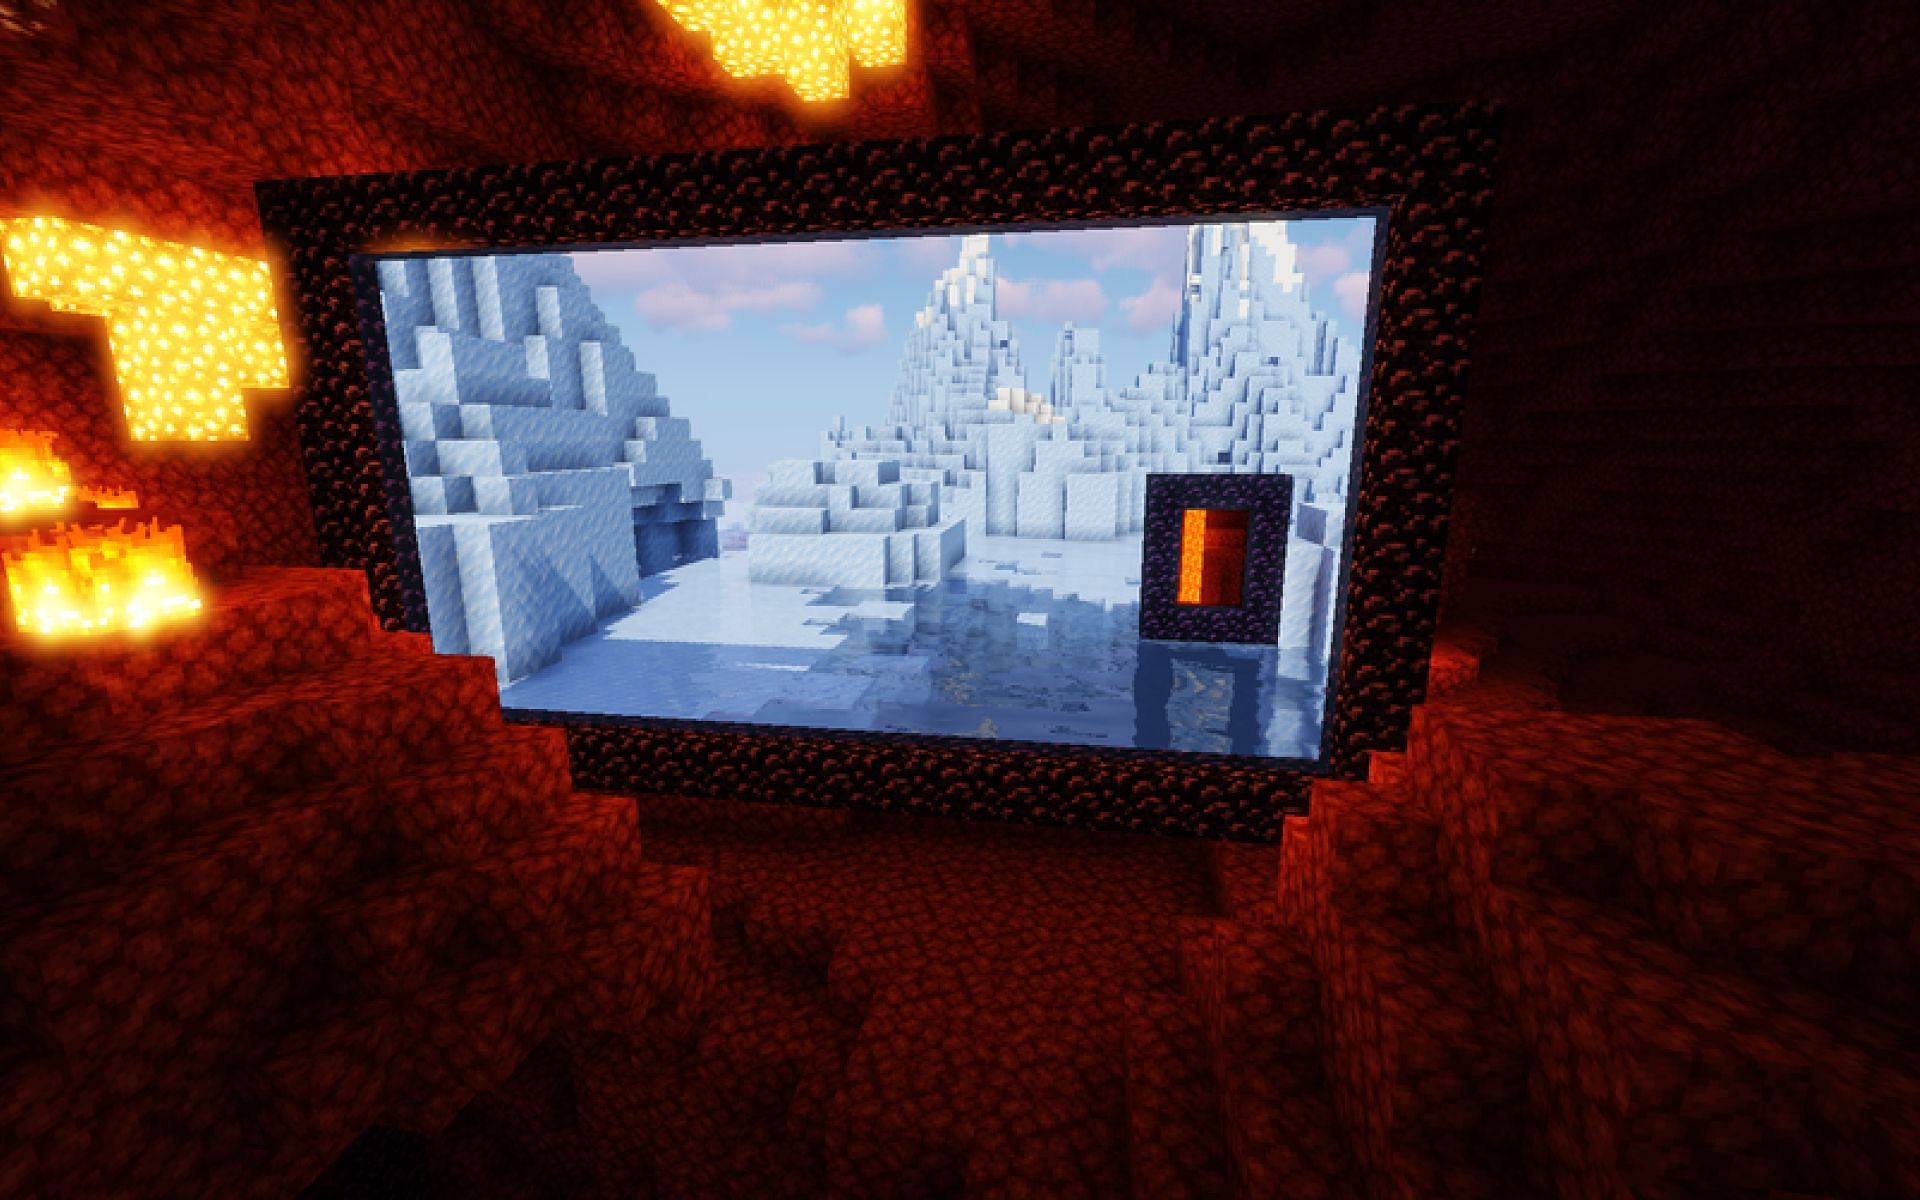 An image of the Immersive Portals mod being used in-game. (Image via Minecraft)